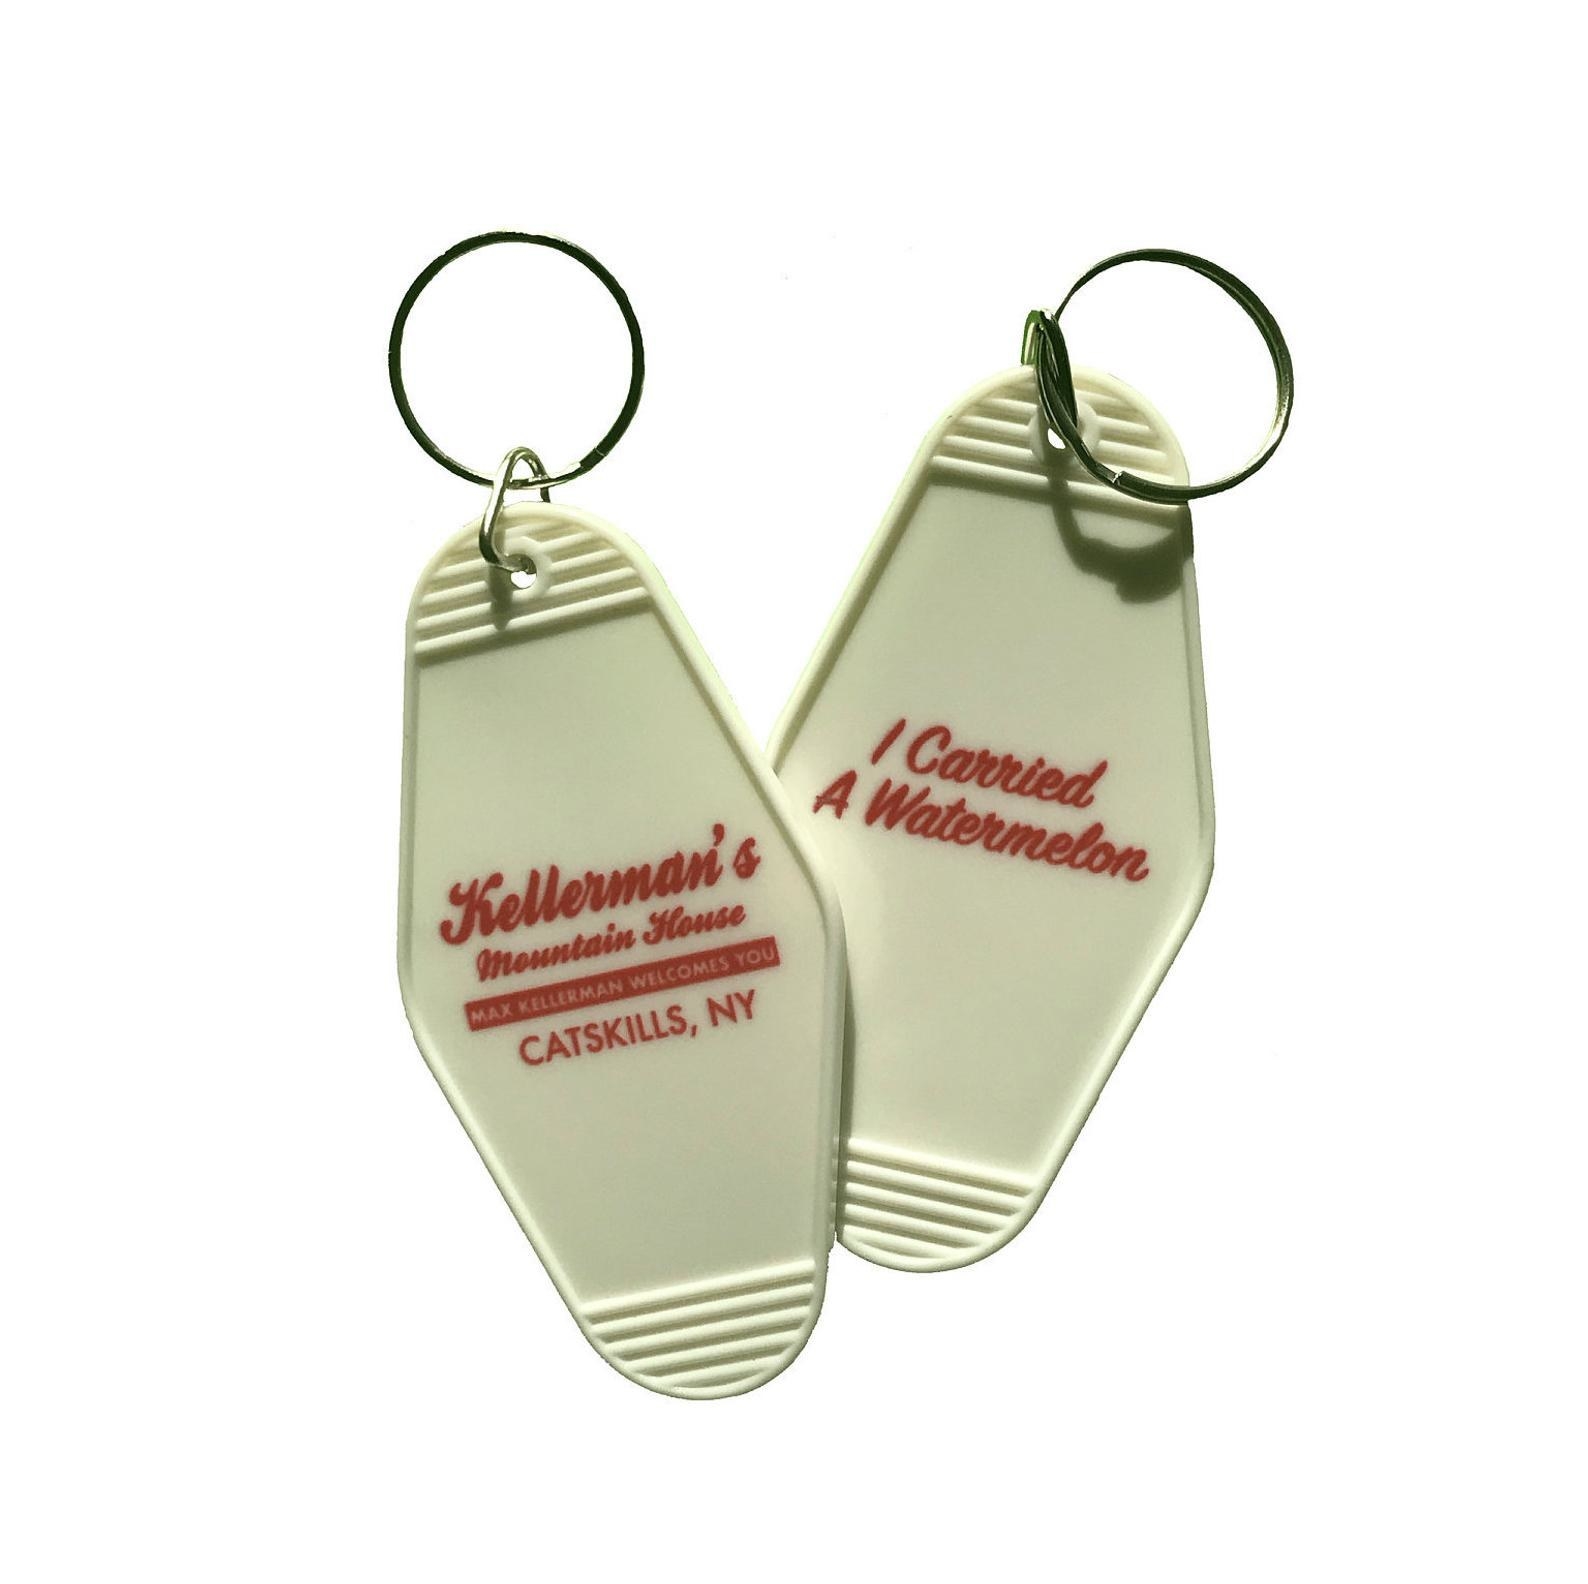 The rhombus keychain with &quot;Kellerman&#x27;s mountain house Catskills NY&quot; on one side and &quot;I carried a watermelon&quot; on the other